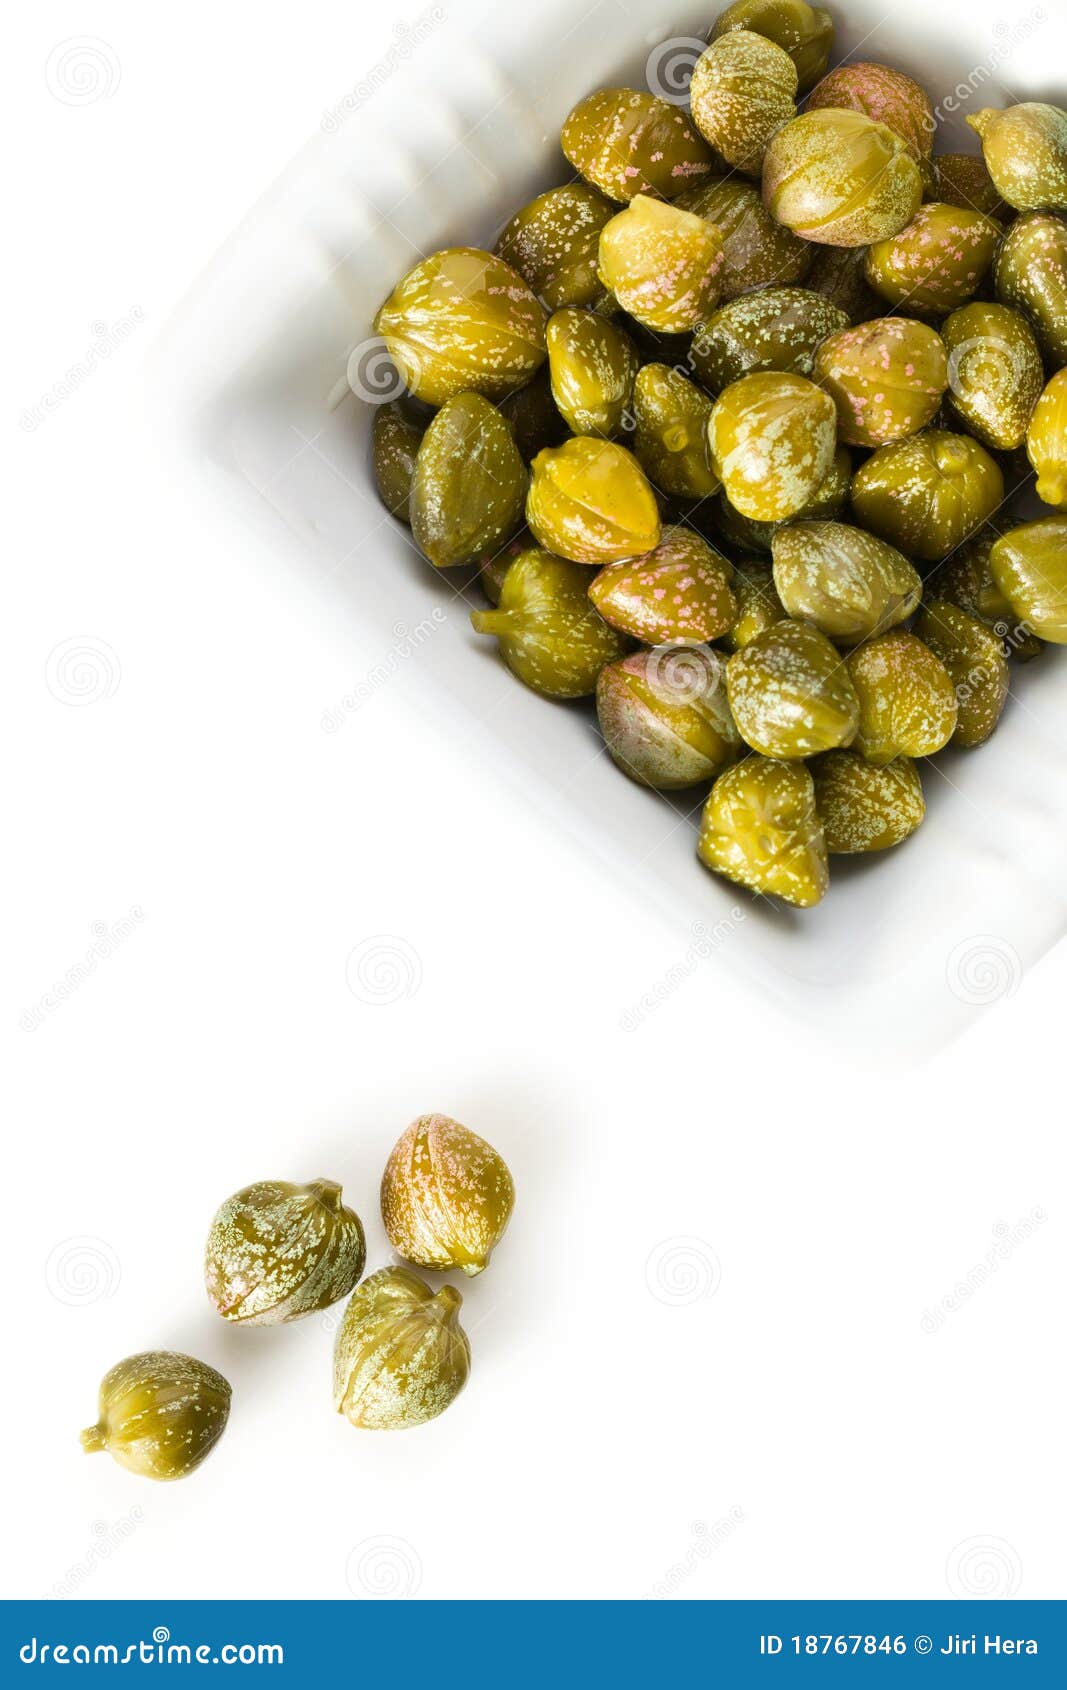 Green capers stock photo. Image of food, diet, caper - 18767846